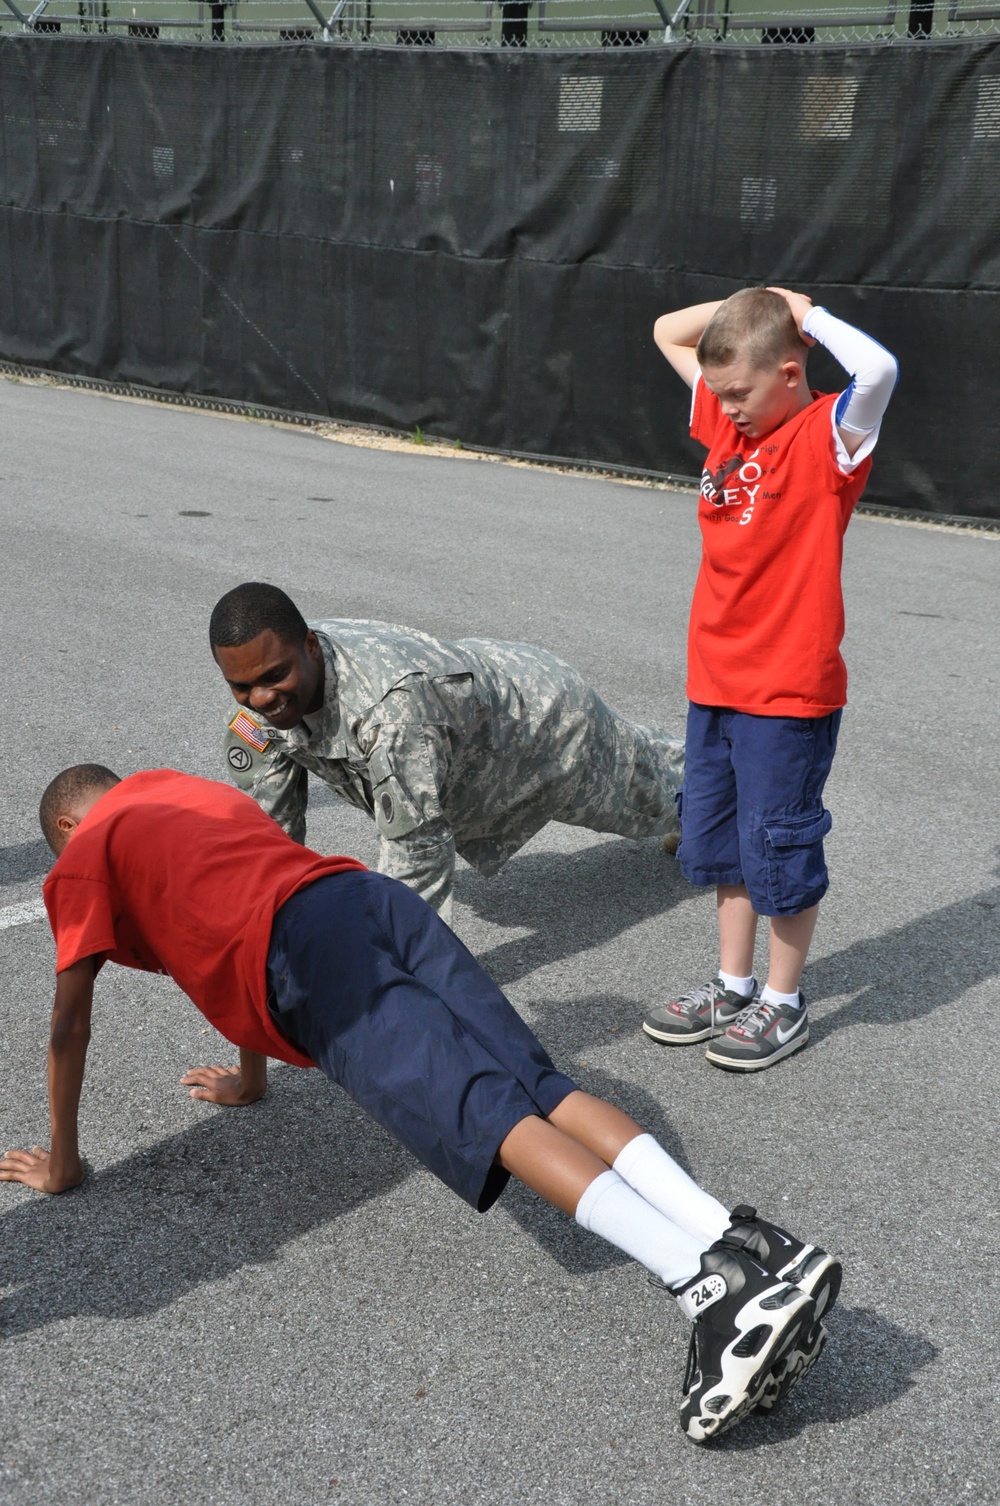 Local elementary school students participate in unit Army day